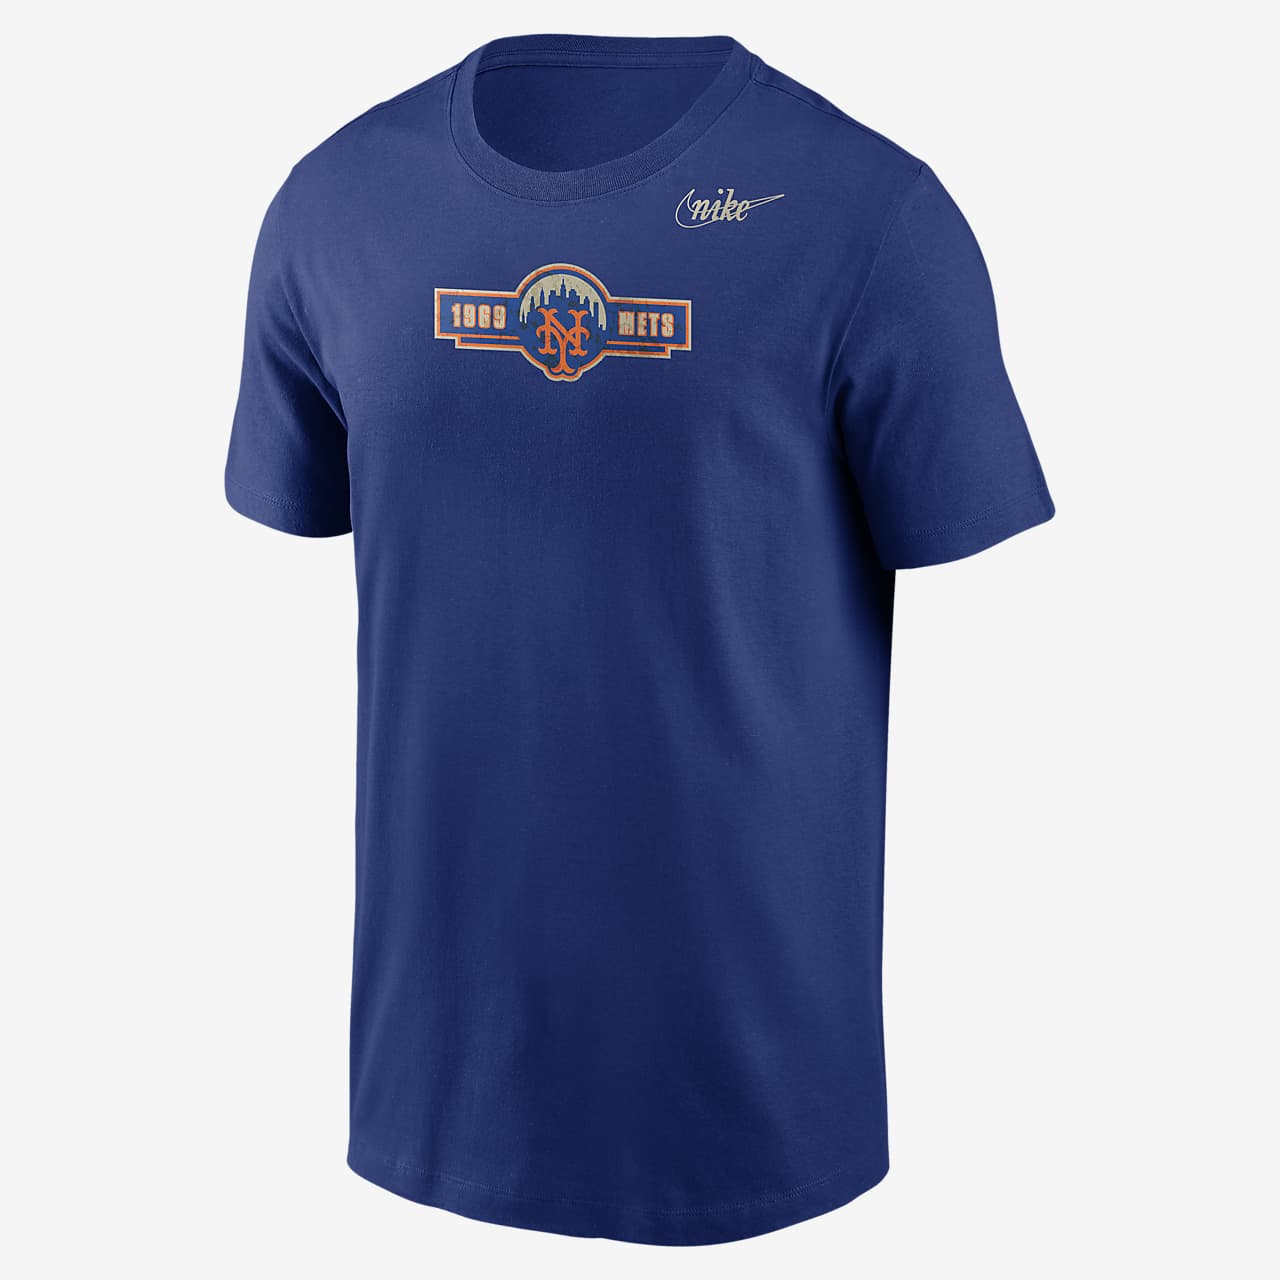 mlb cooperstown shirts